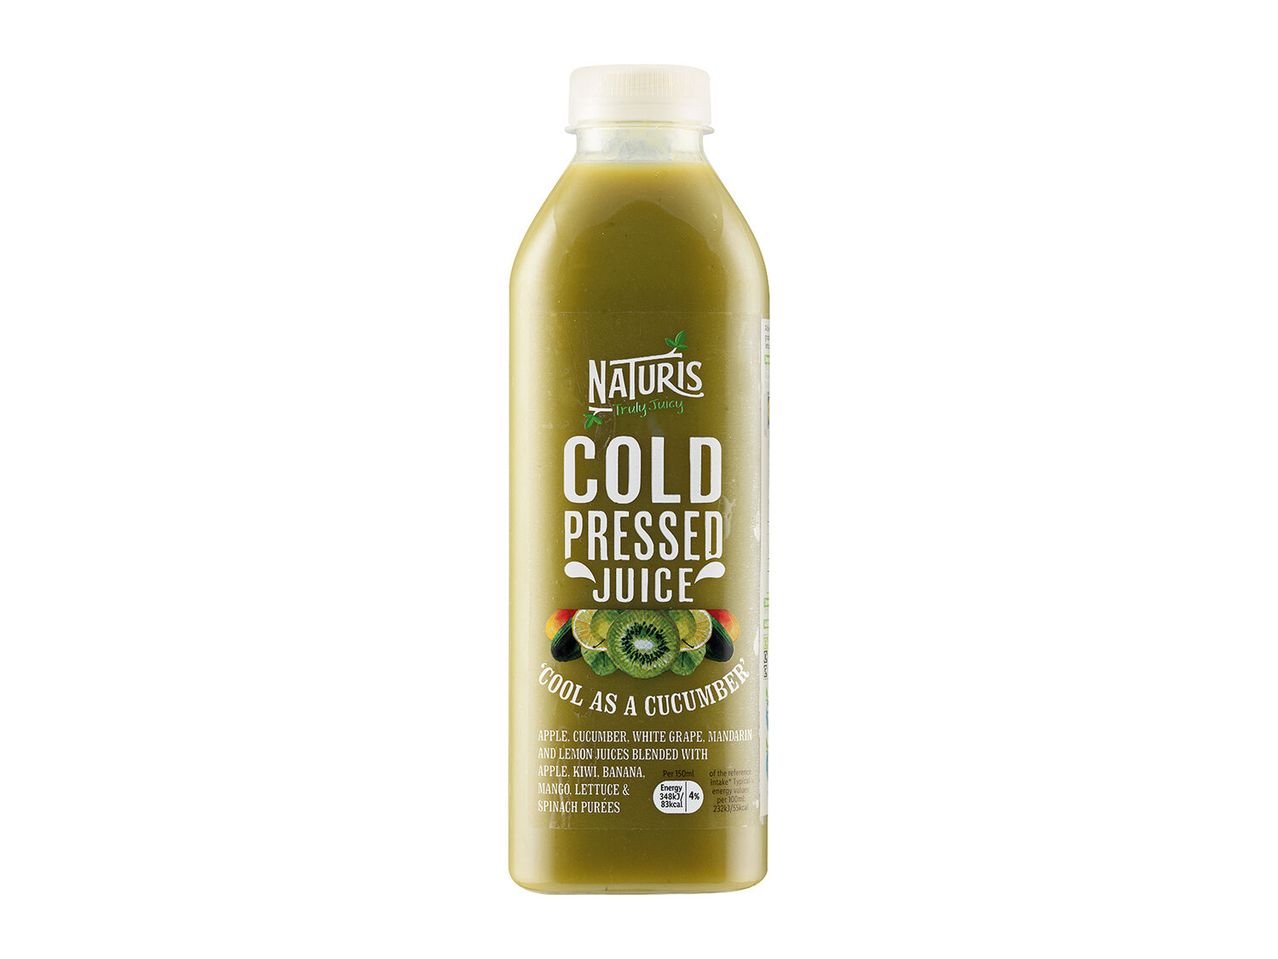 Go to full screen view: Naturis Cold Pressed Juice Assorted - Image 2